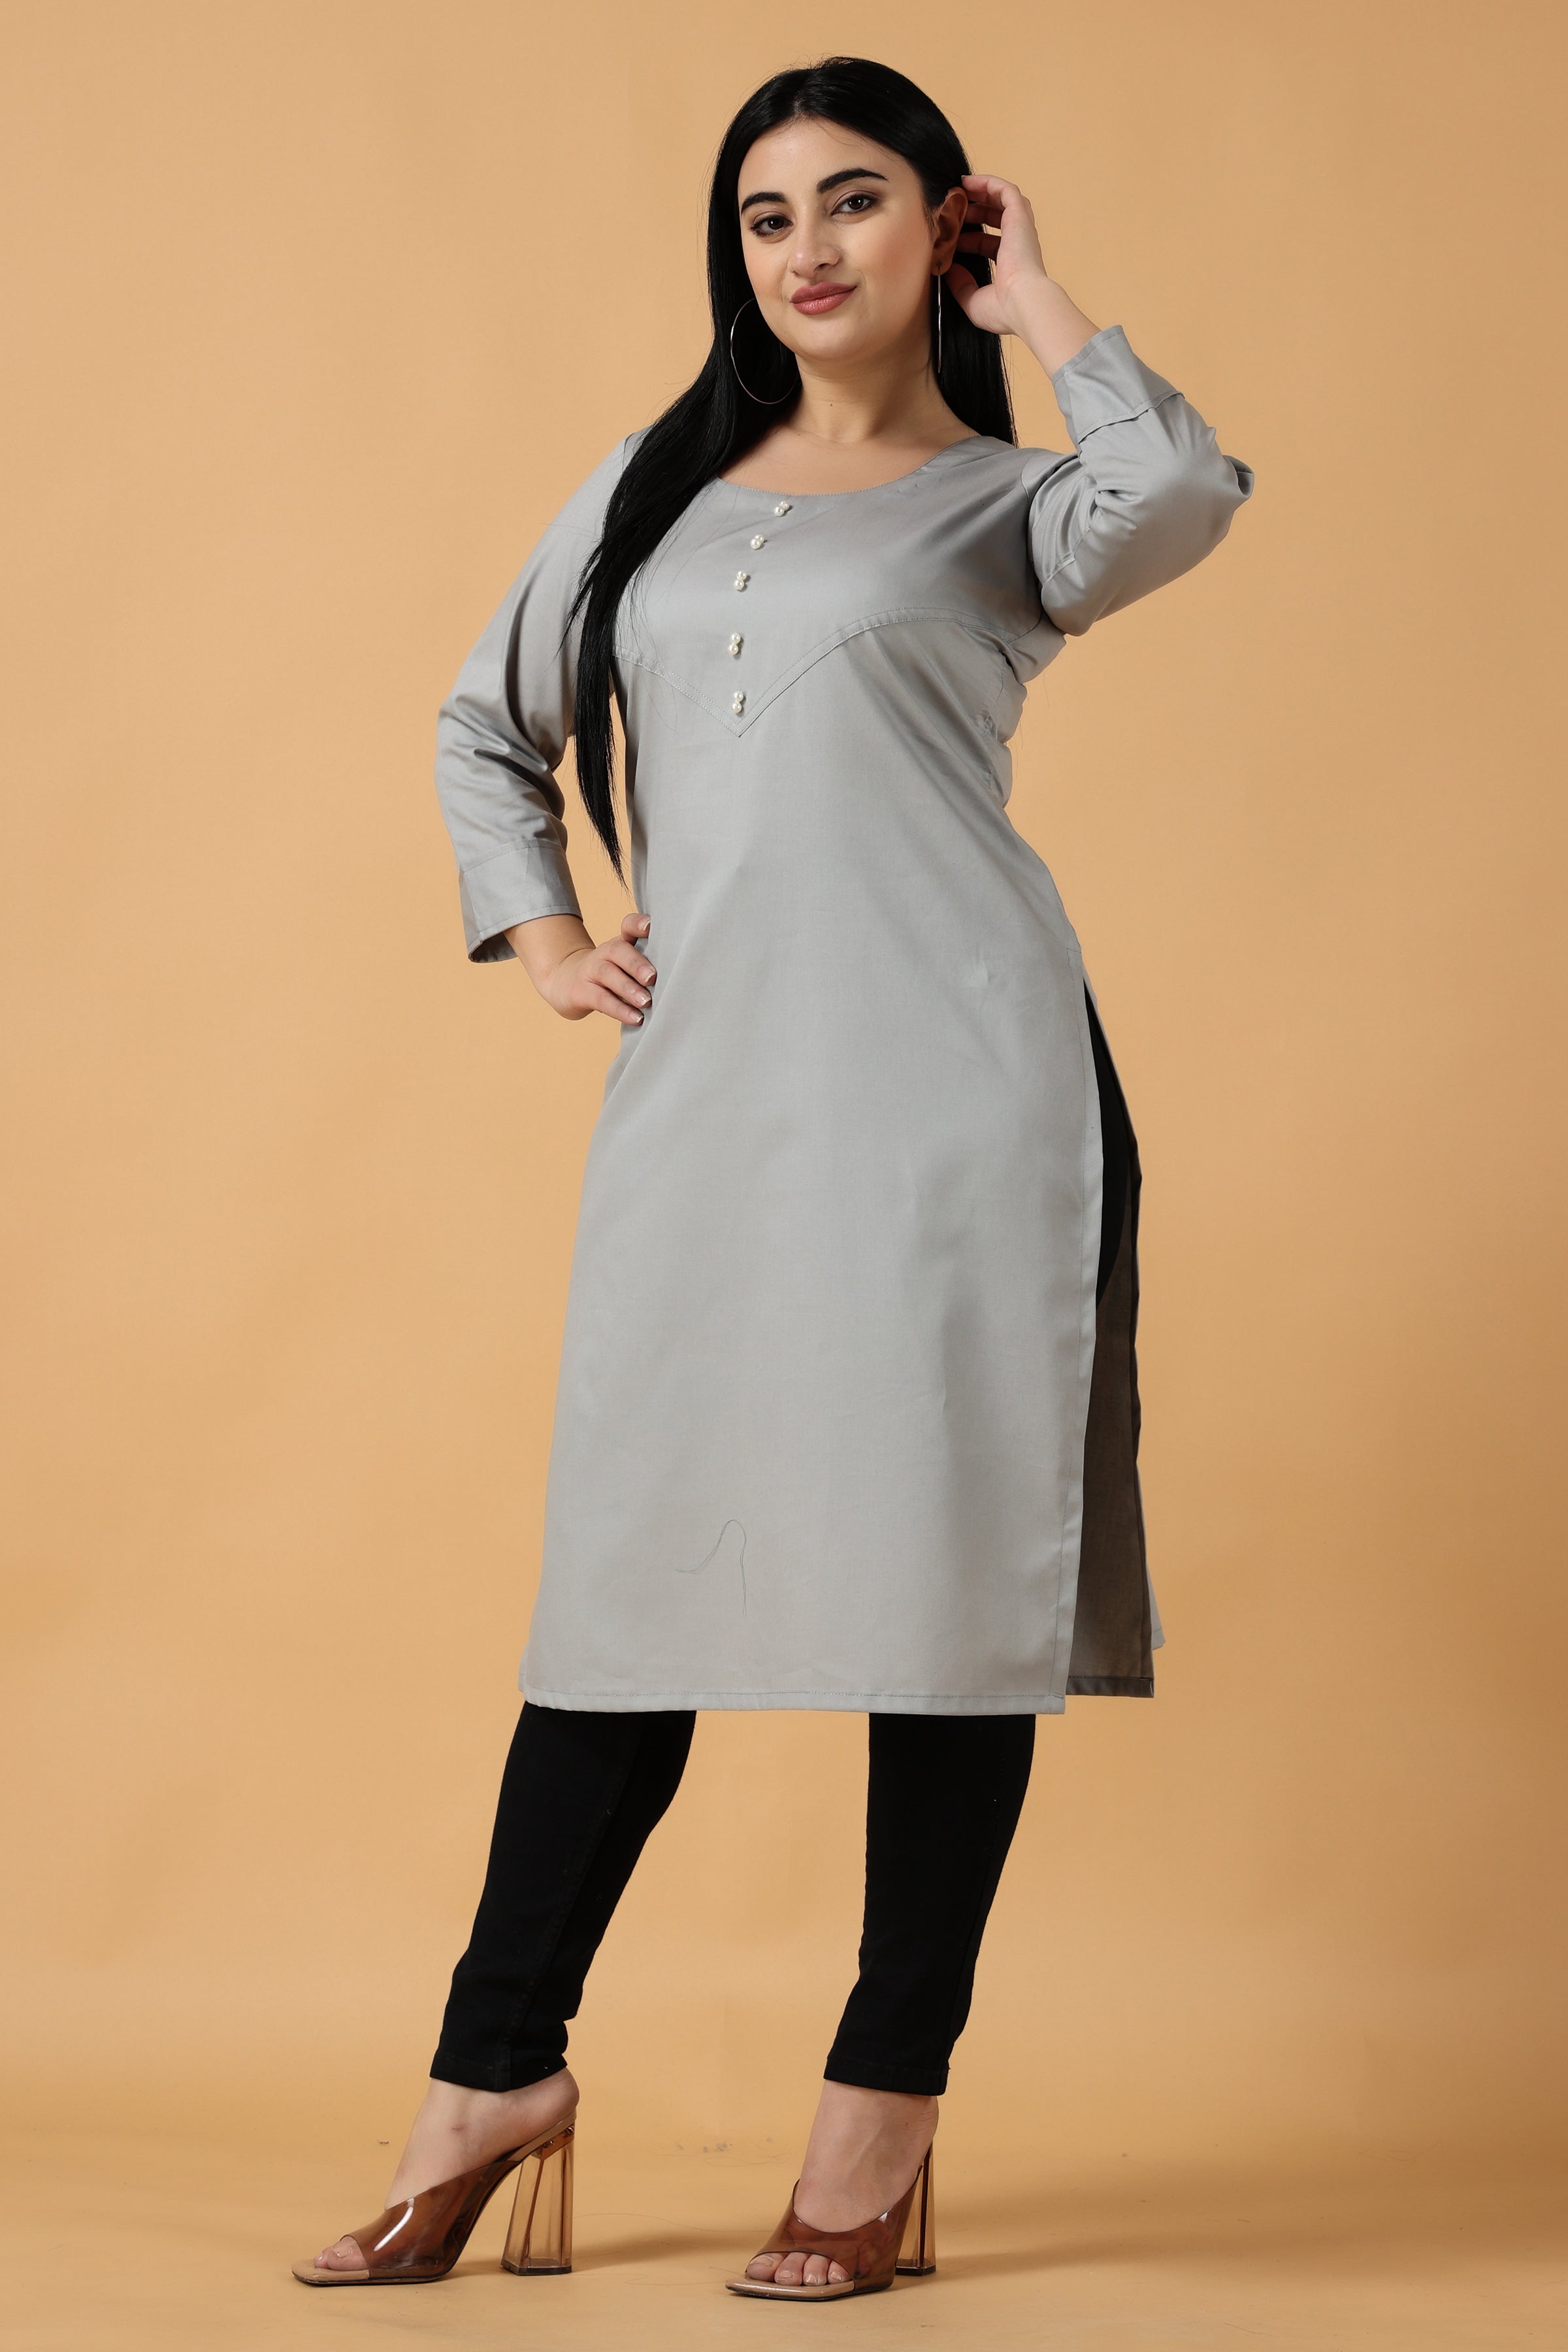 4 Must-have Kurtis/dresses For College And Office Wear| Suit All Body Sizes